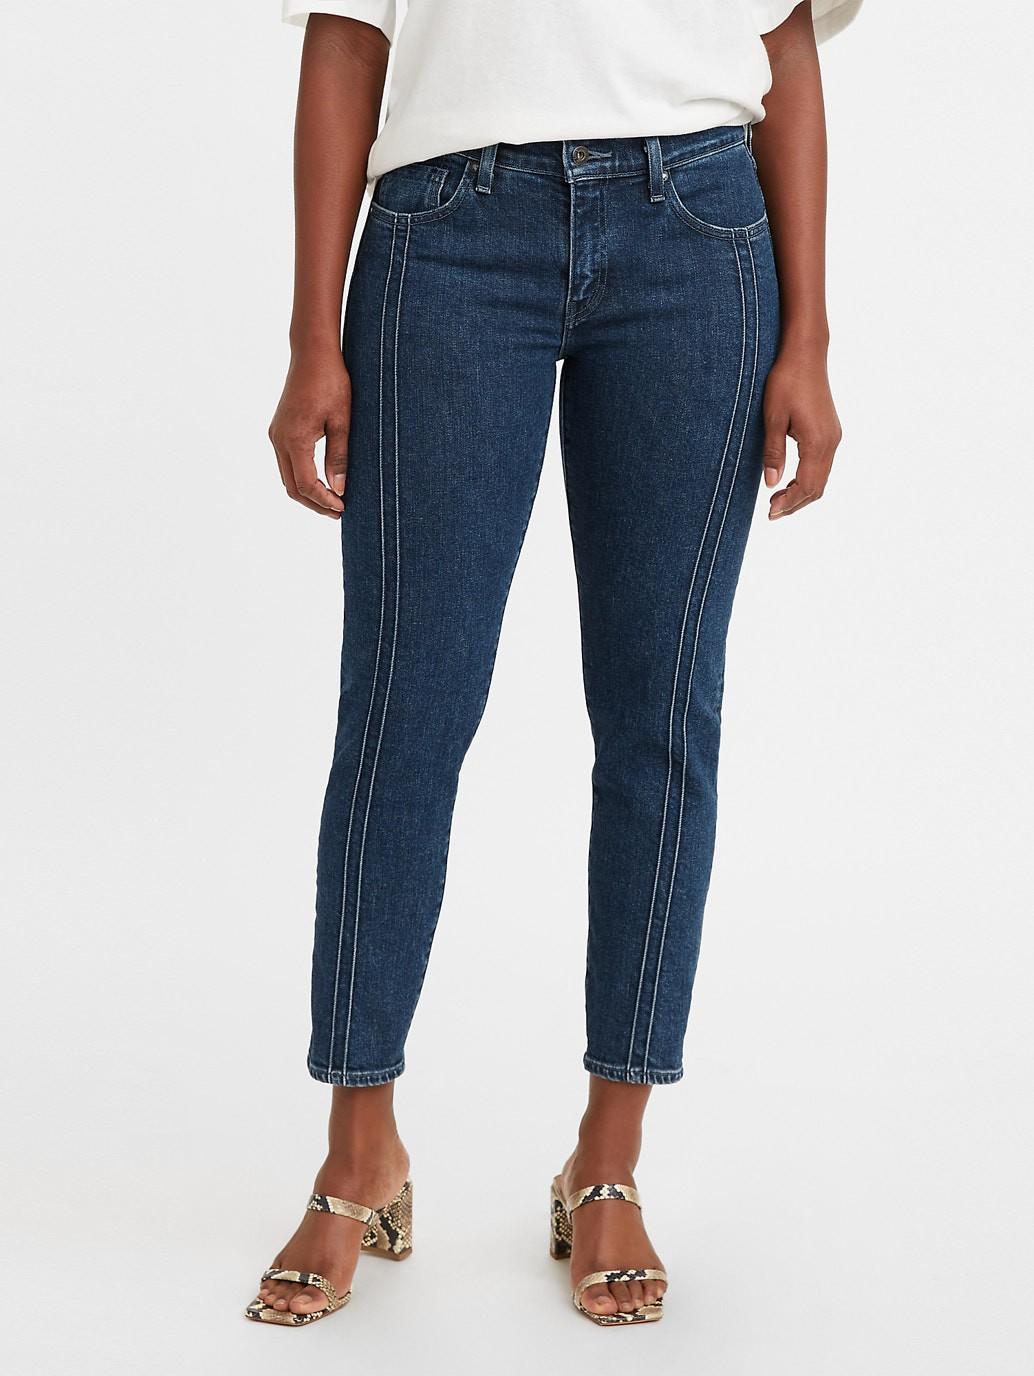 Buy Levi's® Made & Crafted® New Boyfriend Straight Women's Jeans Levi's® Official Online